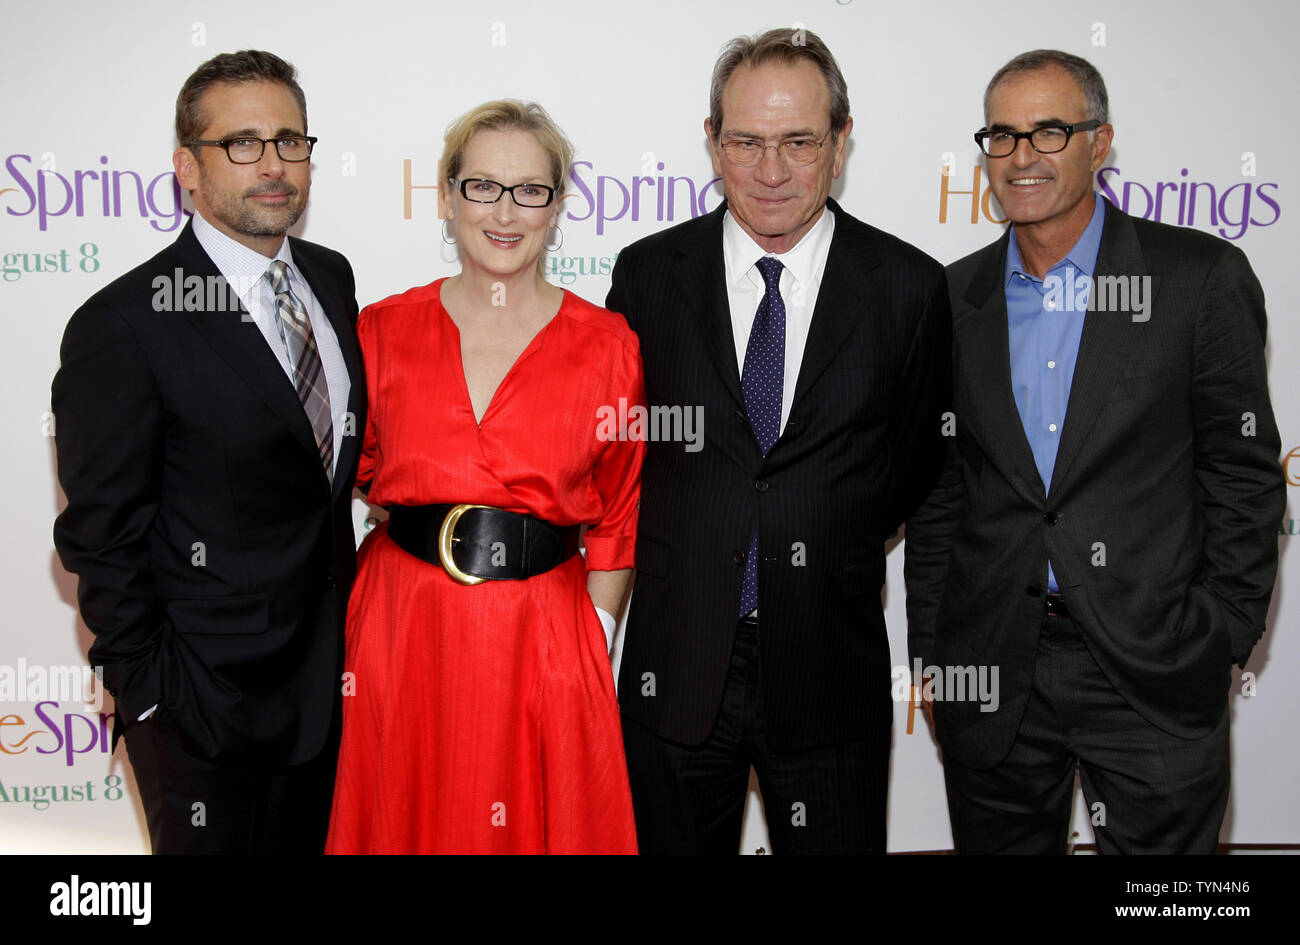 Steve Carell, Meryl Streep, Tommy Lee Jones and David Frankel arrive on the red carpet at the world premiere of Columbia Pictures 'Hope Springs' at the SVA Theater in New York City on August 6, 2012.       UPI/John Angelillo Stock Photo